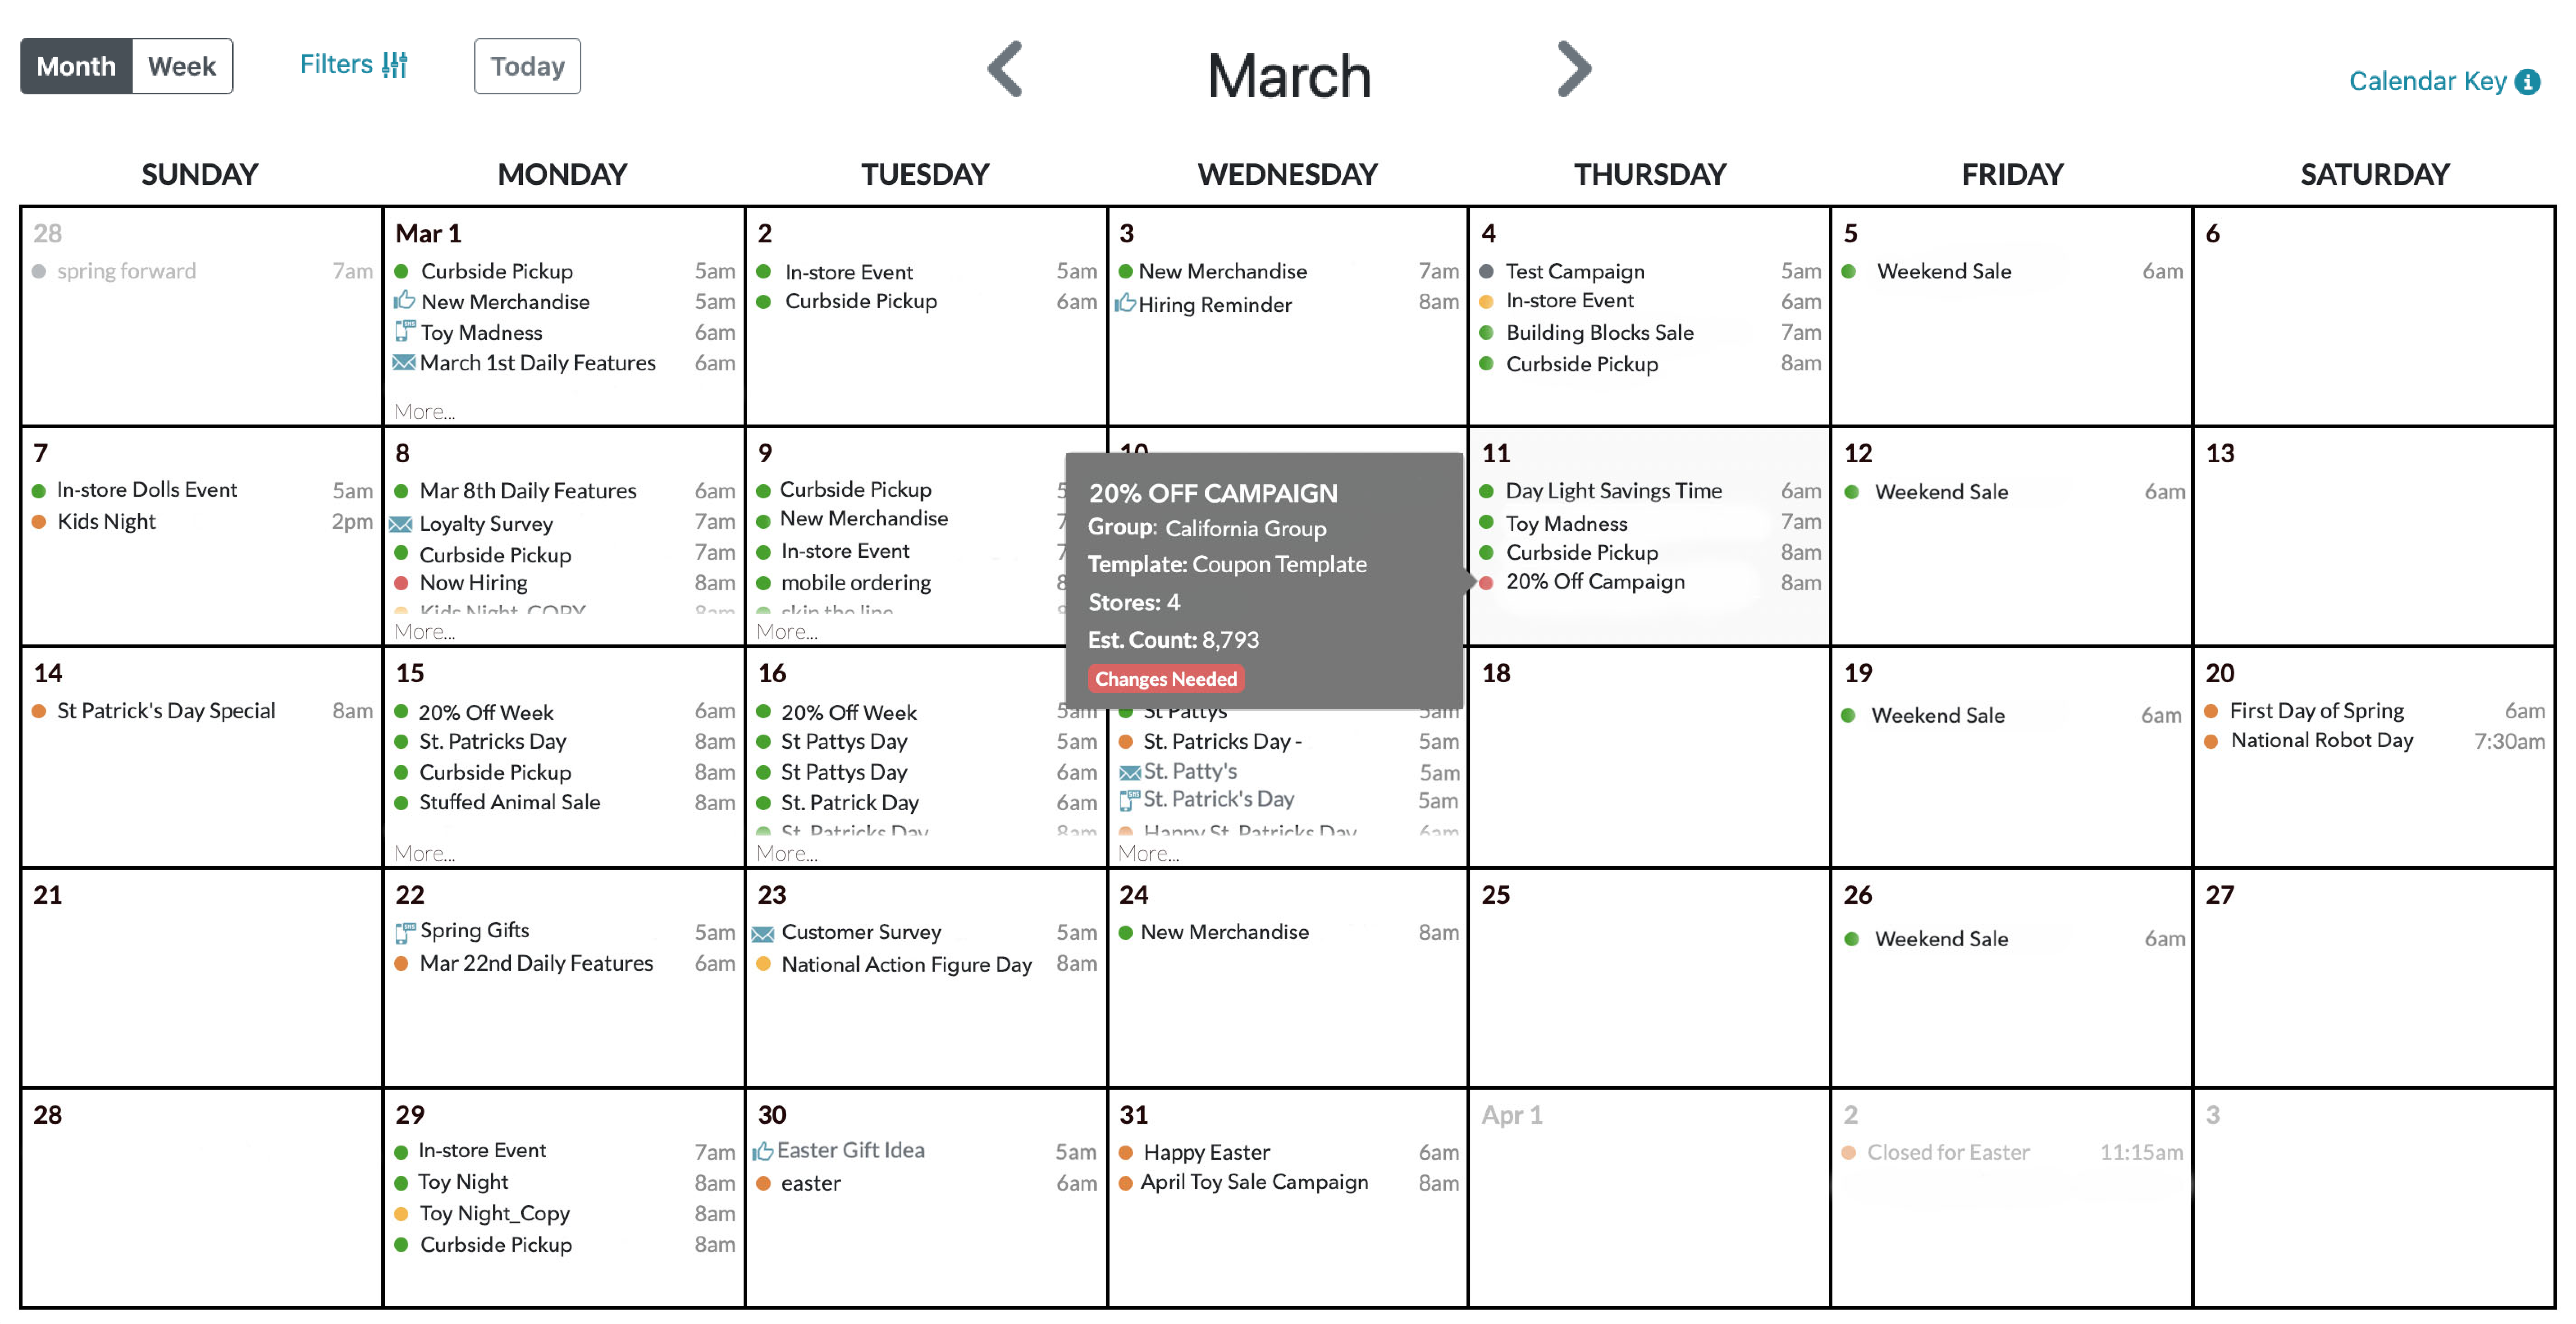 The calendar view allows users to see all campaigns in a month or week view, alongside corporate marketing launches.